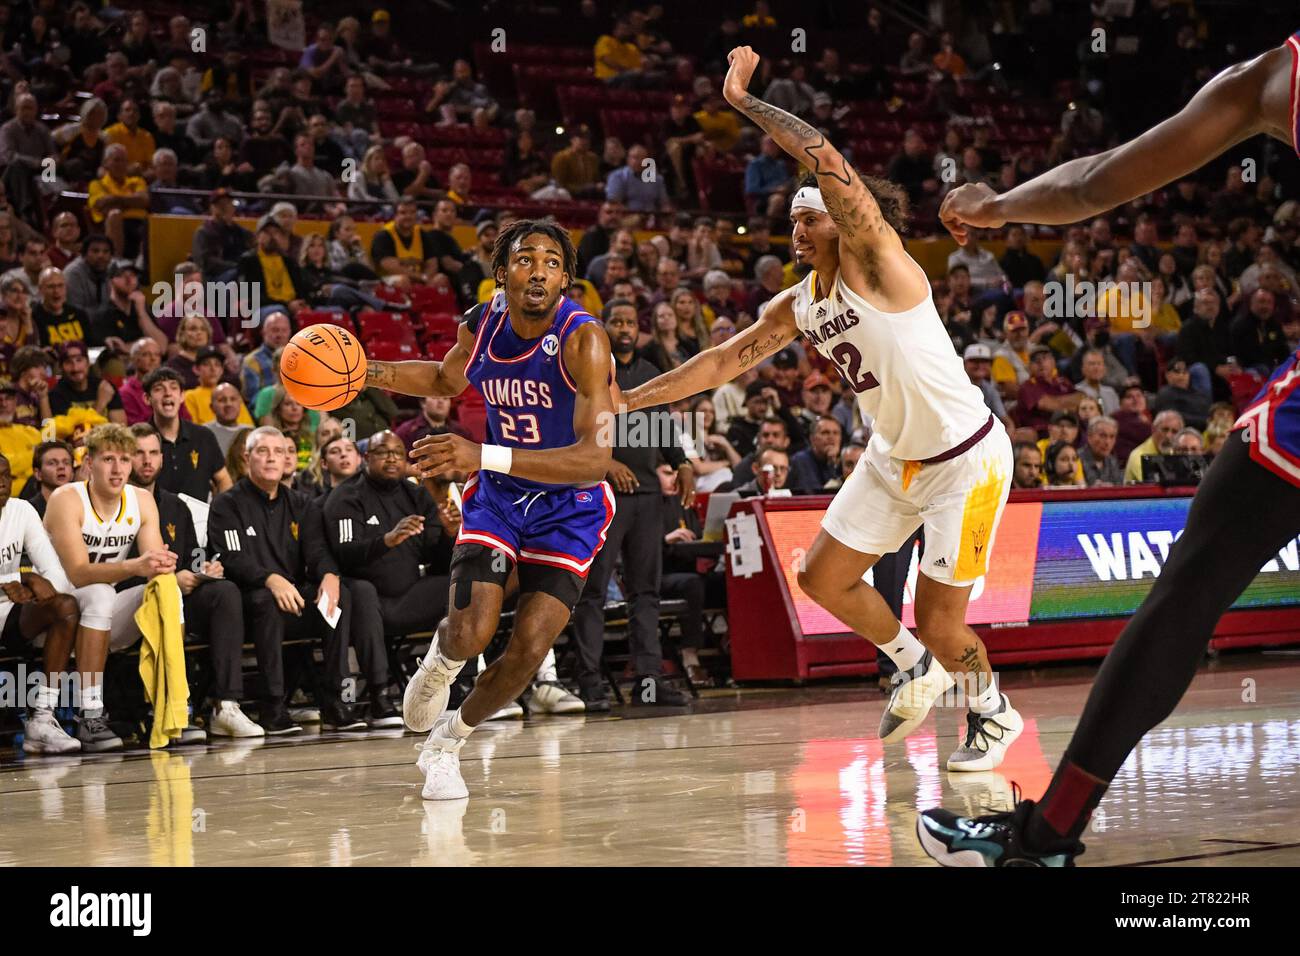 UMass Lowell River Hawks forward Cam Morris III (23) drives to the basket in the first half of the NCAA basketball game against Arizona State in Tempe Stock Photo